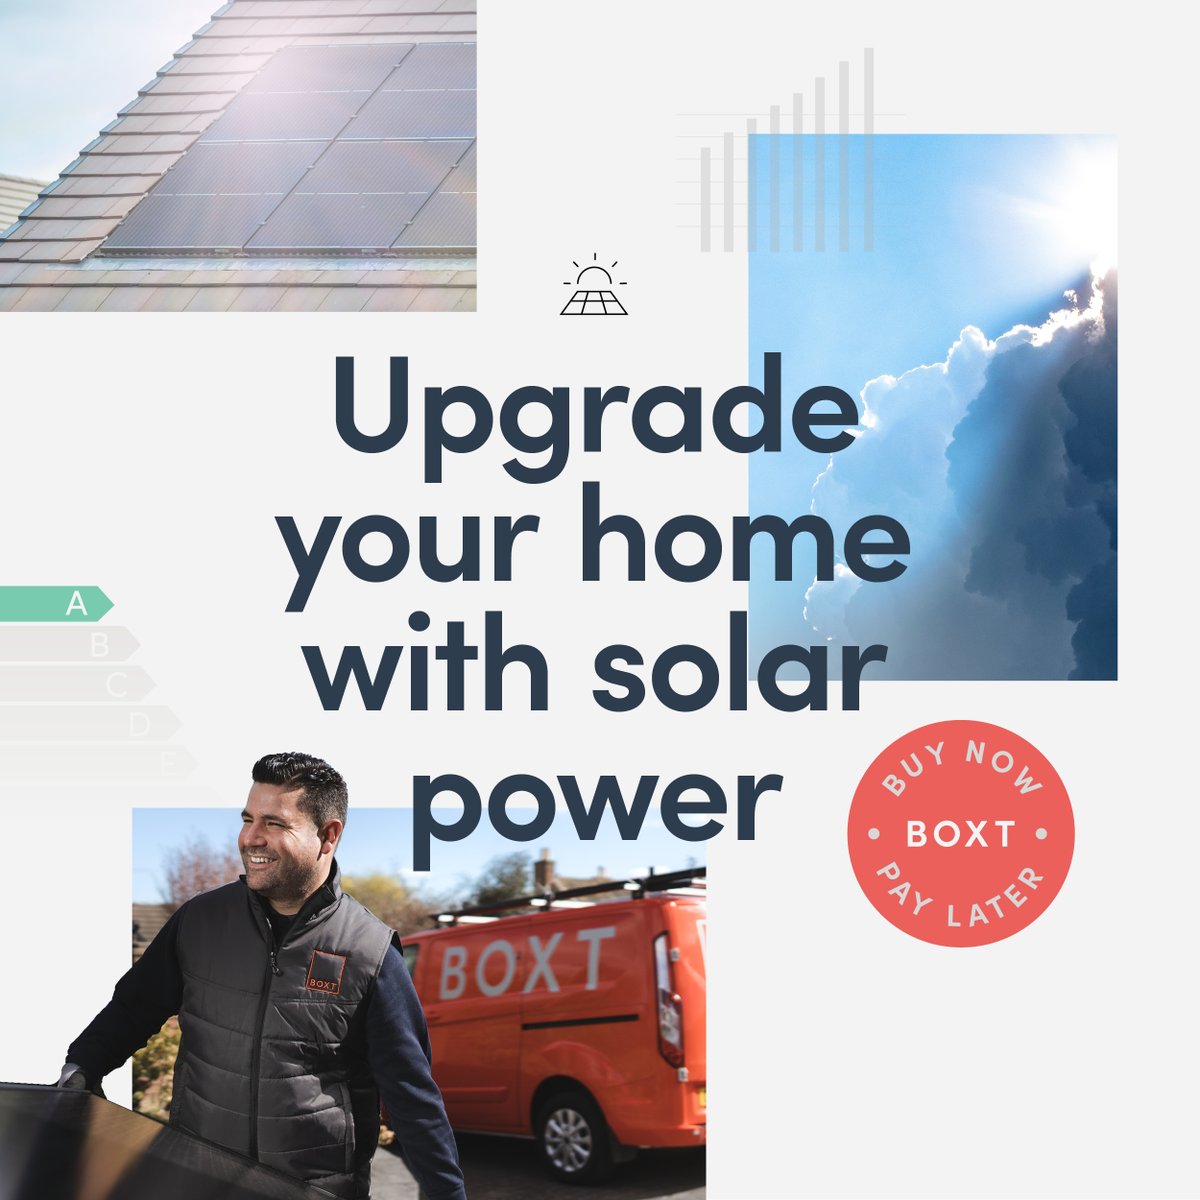 Looking to upgrade your home? With solar panels you’re benefiting from green energy sources, saving up to £1,180 a year* (when combined with battery storage) and adding value to your home. BOXT offer flexible ways to pay and installation in as little as two weeks. *T&Cs apply.